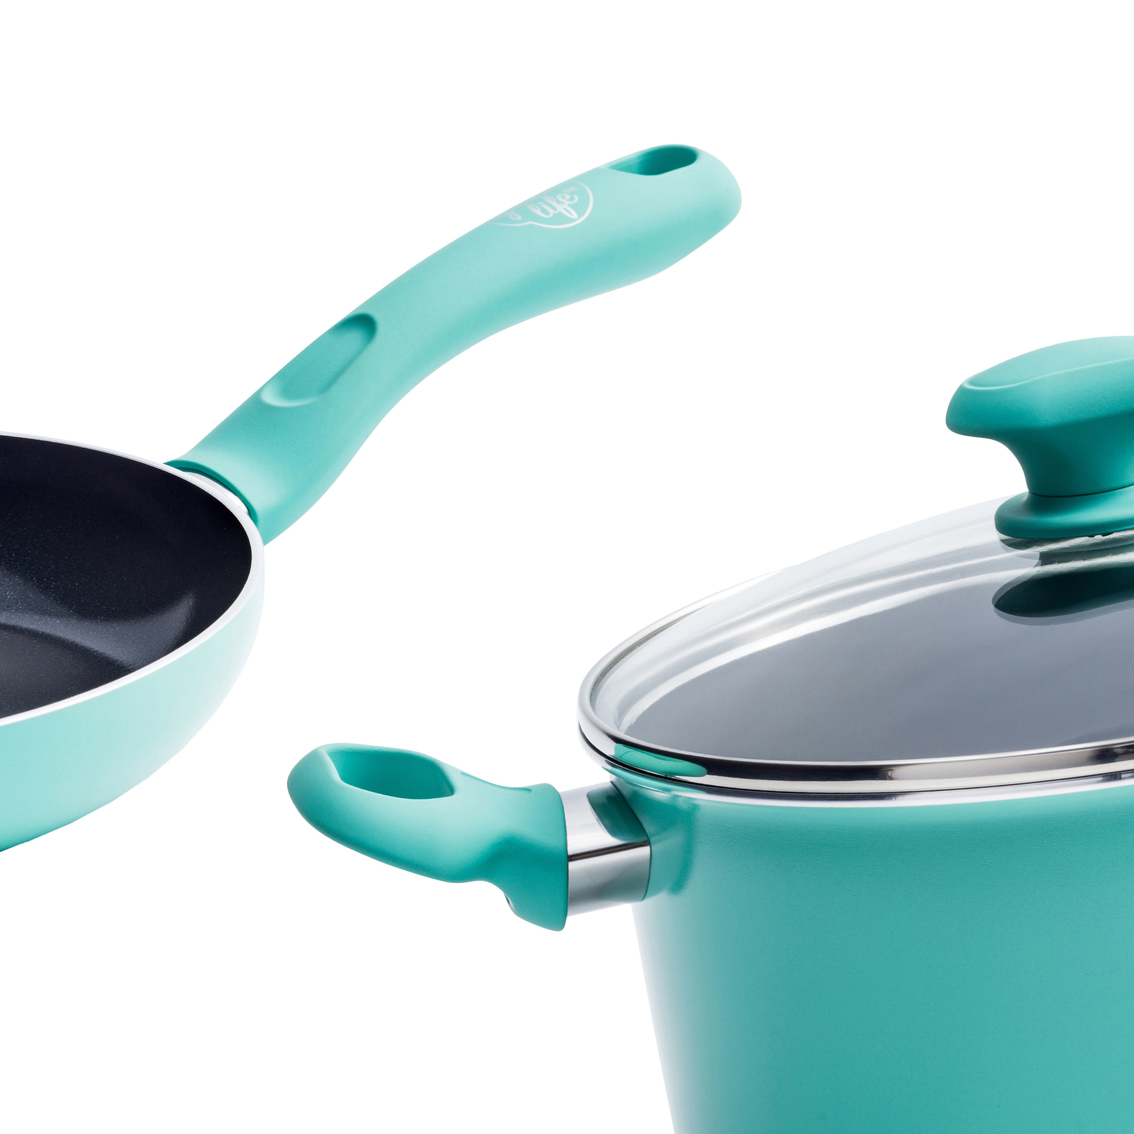 Greenlife Diamond Ceramic Non-stick 13pc Cookware Set Turquoise for sale online 